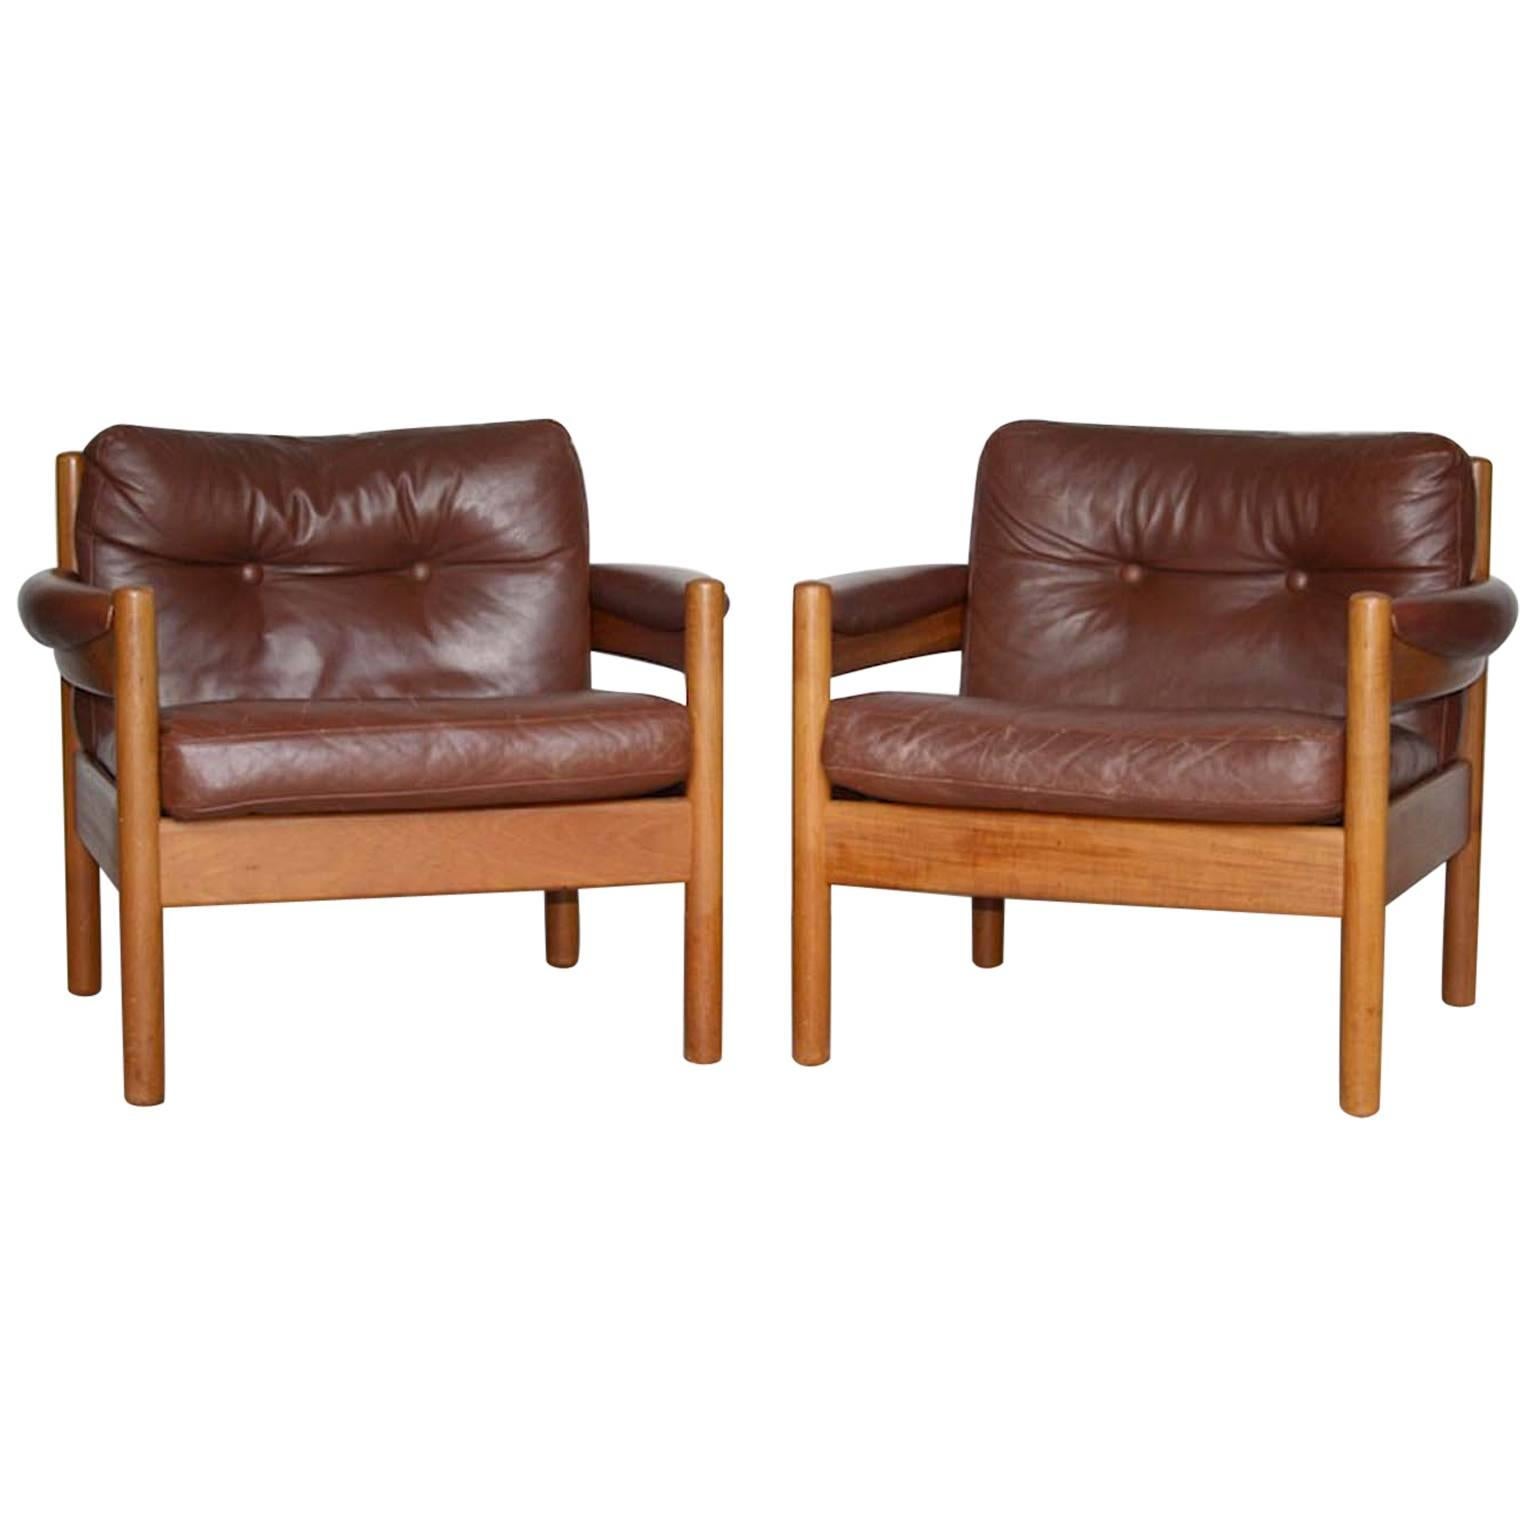 Lodge or Cottage Style Mid-Century Scandinavian Leather Lounge Chairs, 1960s